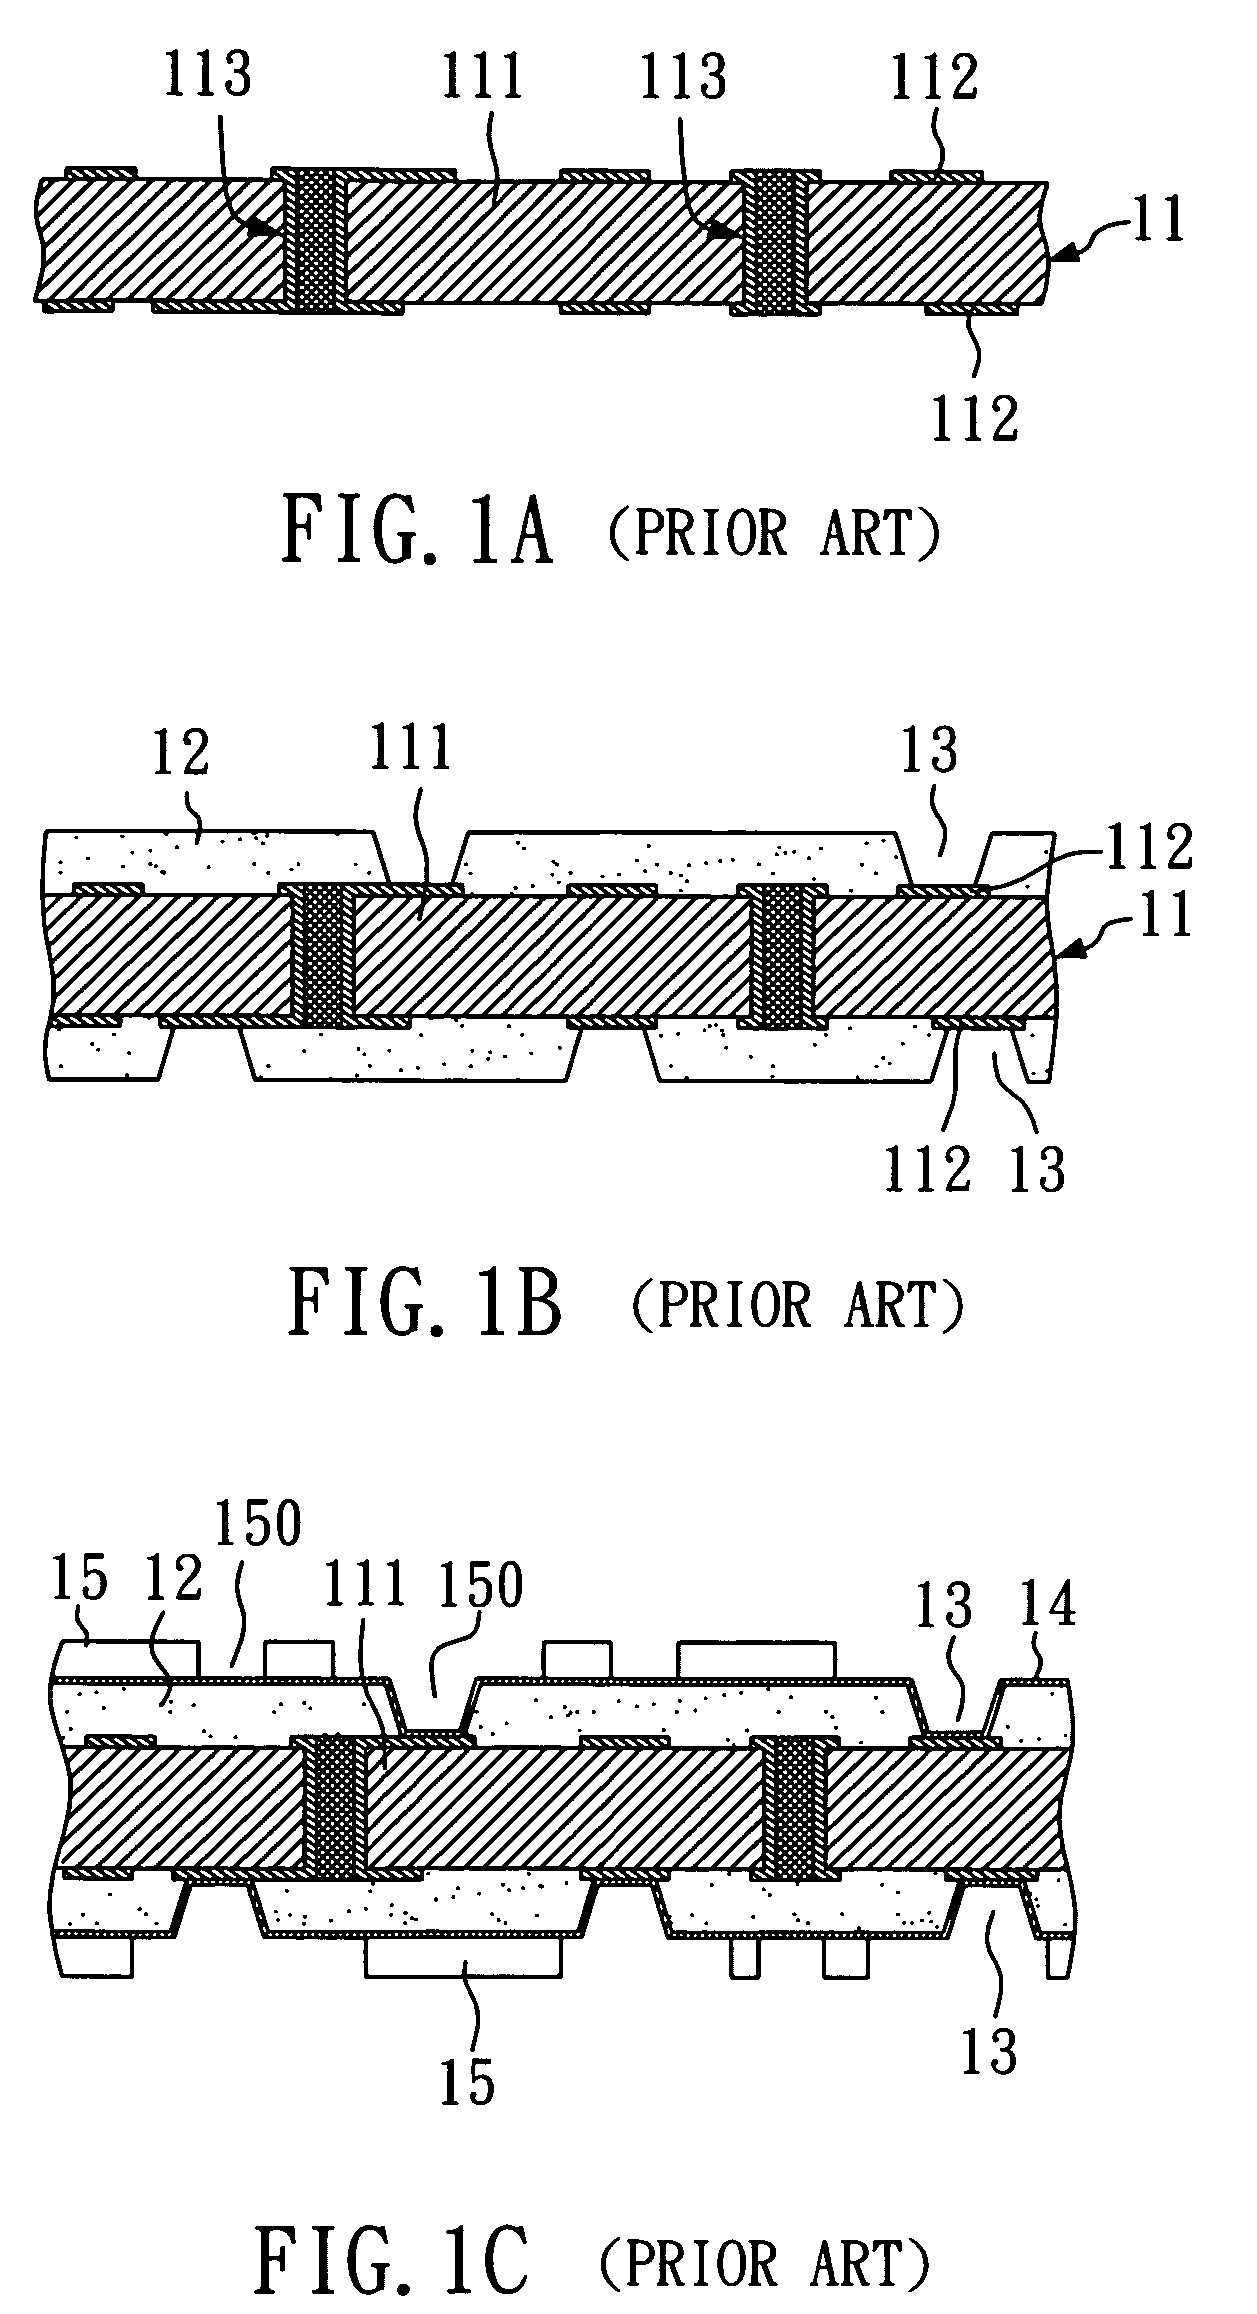 Coreless package substrate with conductive structures